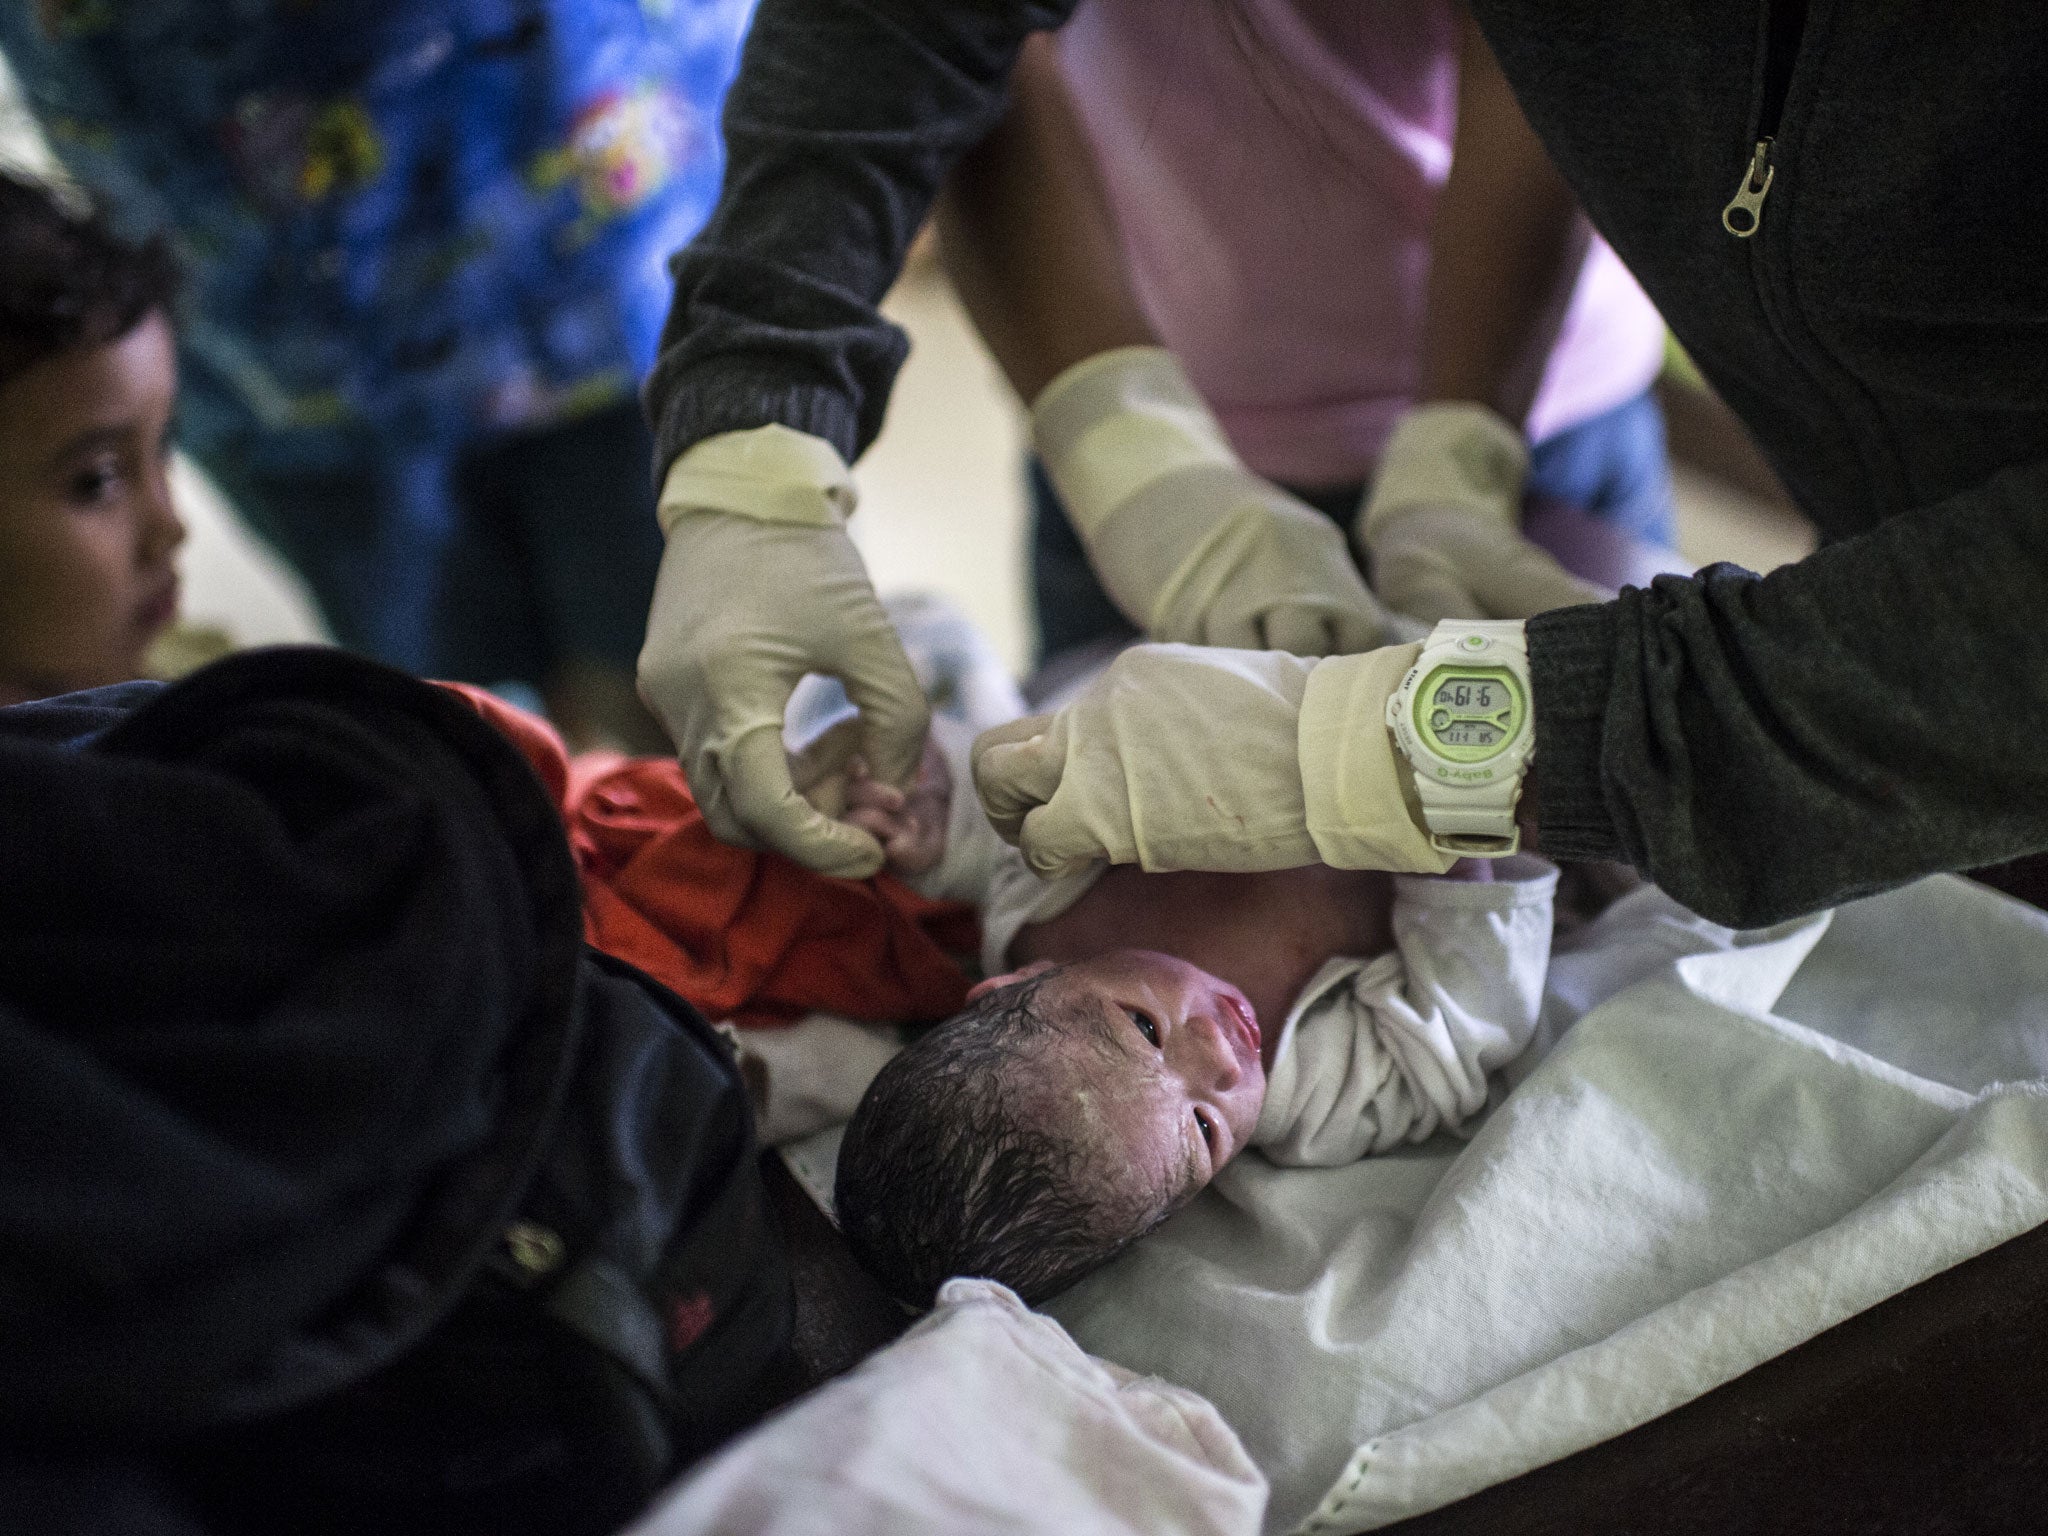 Analyn's newborn baby is checked by staff at the rural health unit in Tolosa, outside of Tacloban